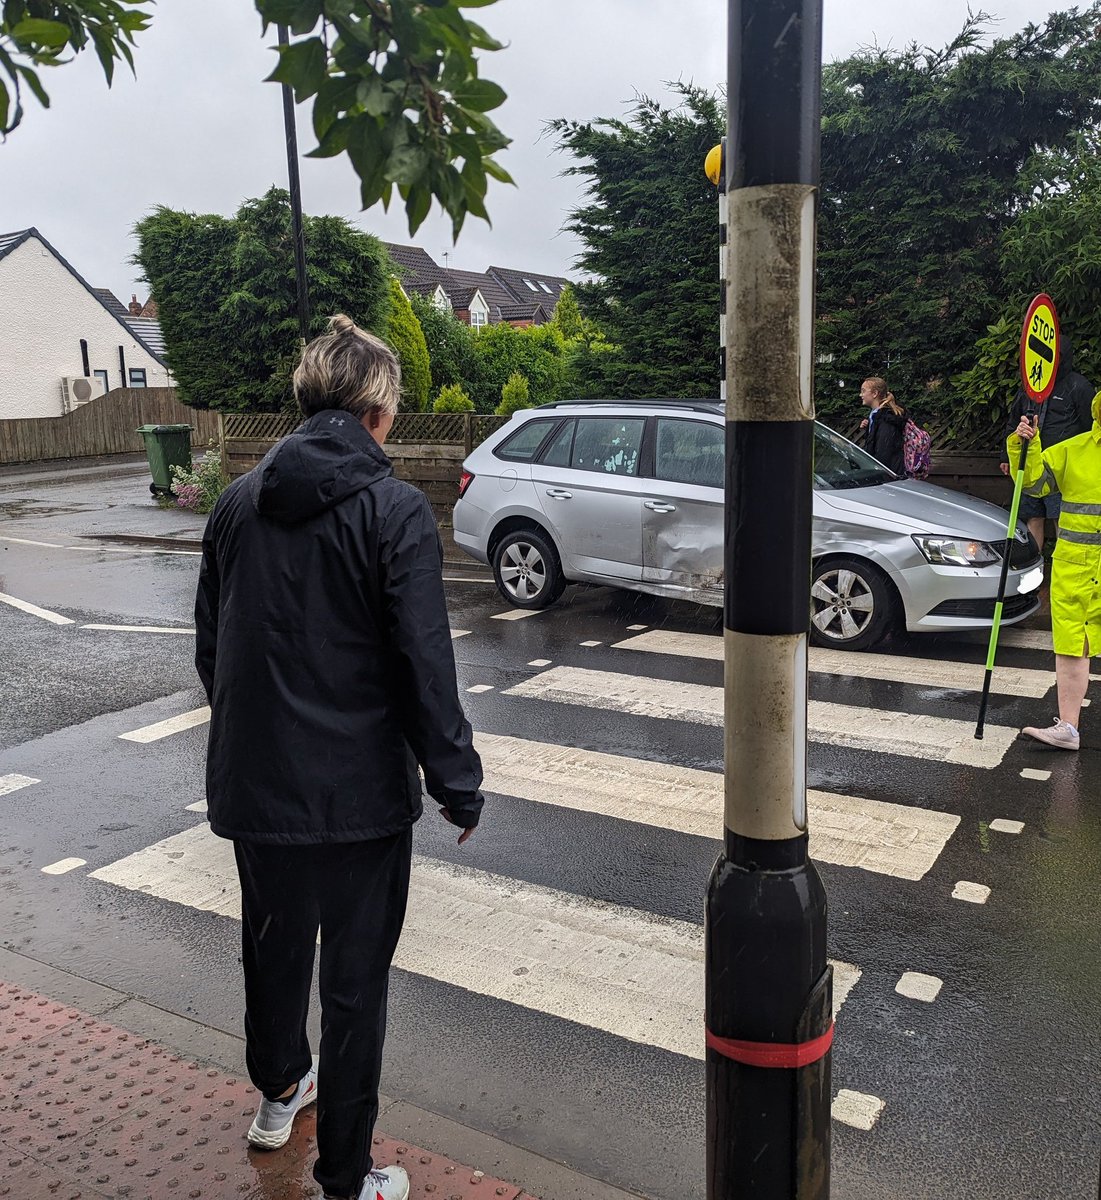 I wonder how this happened.
School crossing.
School run.
Numerous junctions.
Rain.
Speed calming measures (chicane).
30 mph zone (should be 20 mph?)
#Rufforth
#York
#B1224
@yorkpress